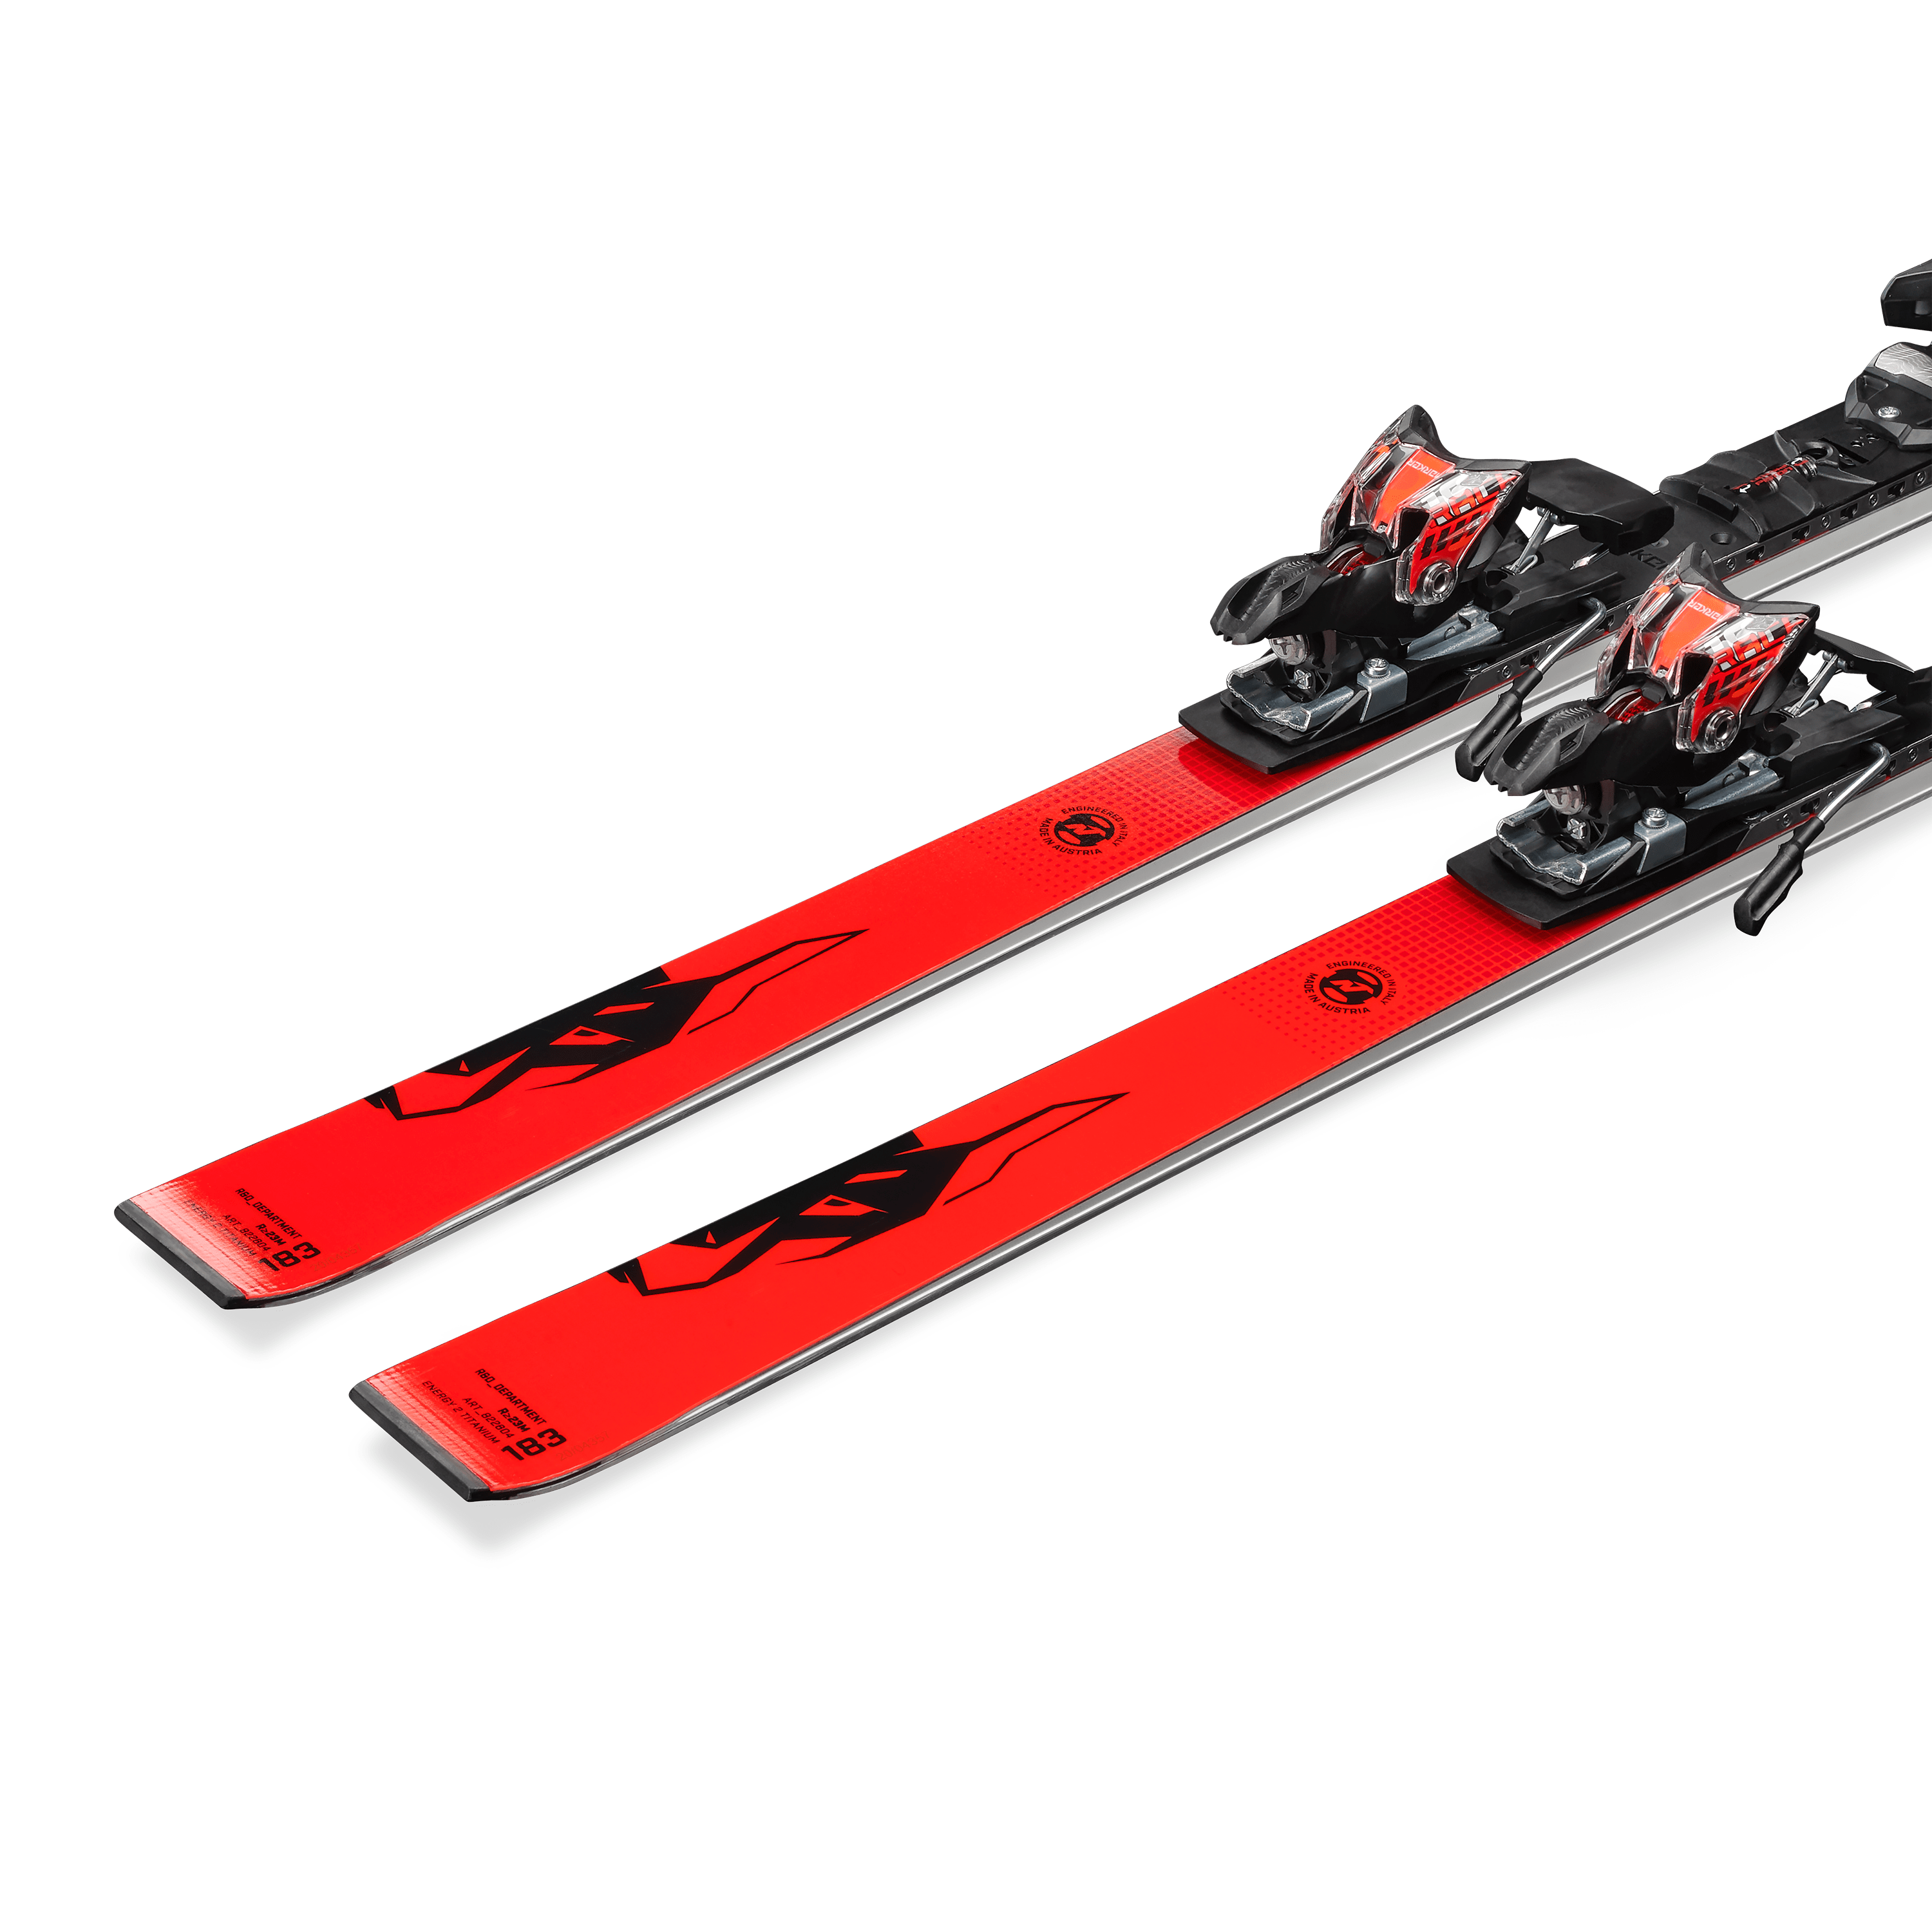 Picture of the Nordica Dobermann gs race plate skis.